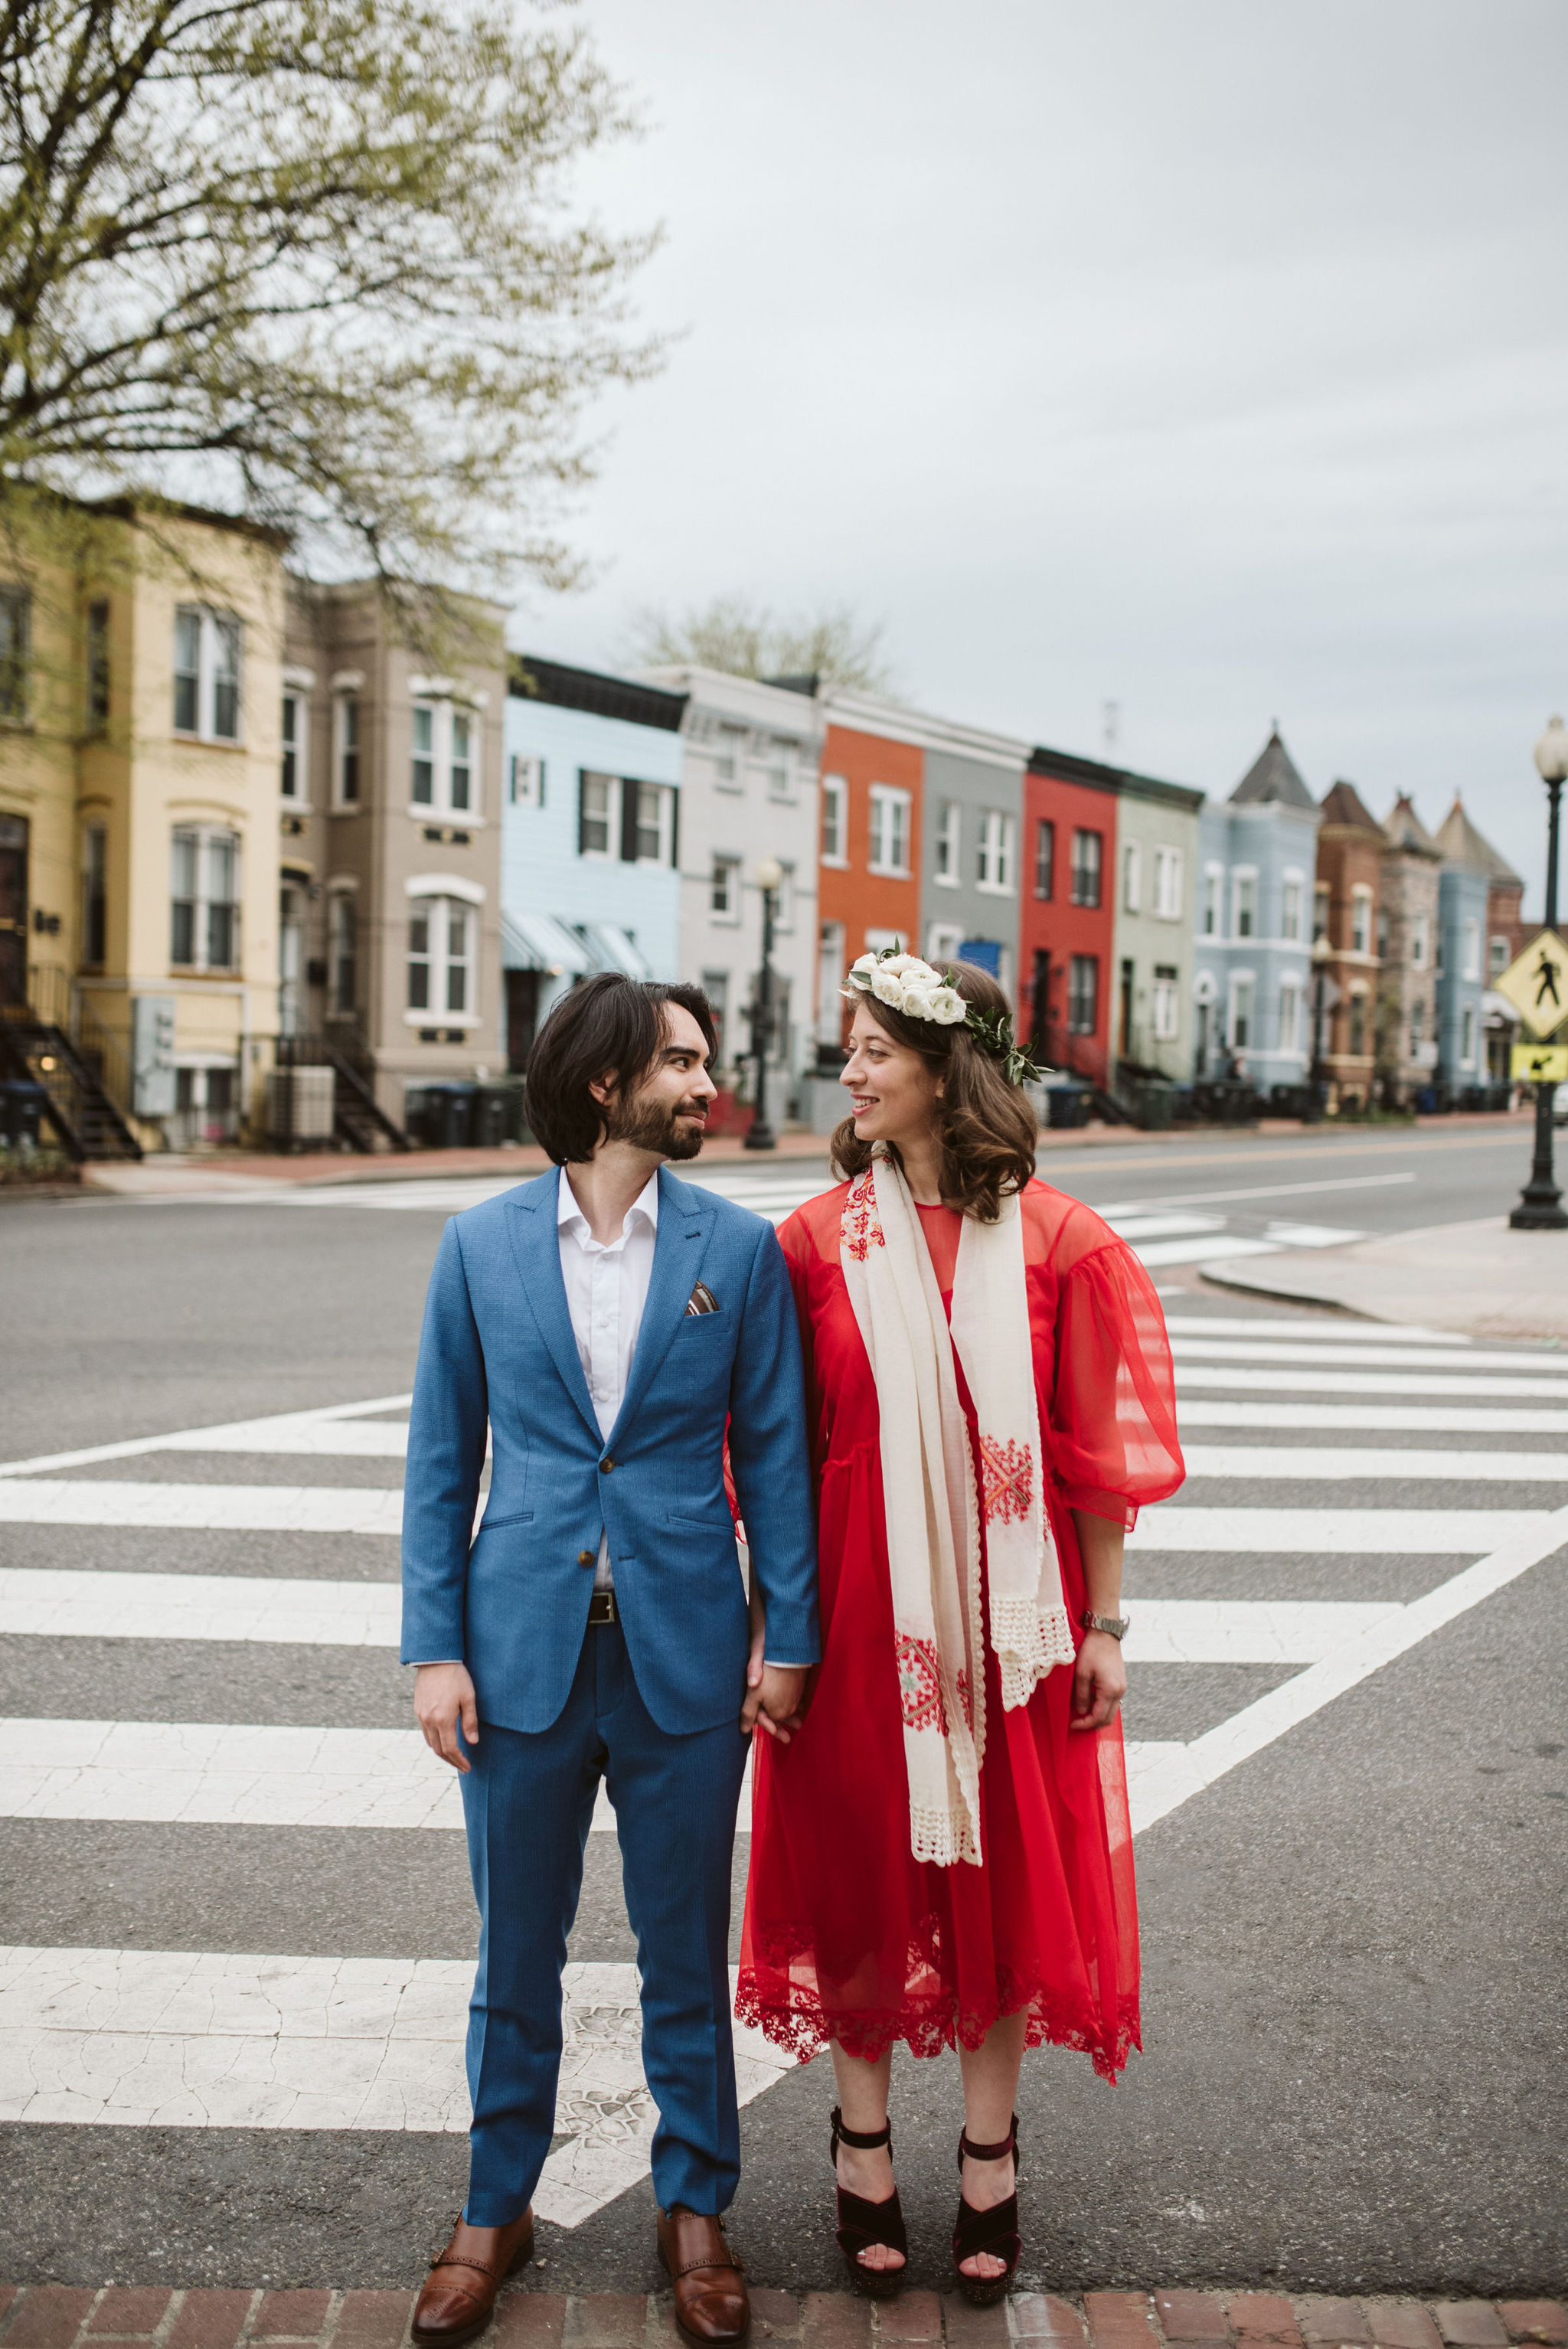  Washington DC, Baltimore Wedding Photographer, Intimate Wedding, Traditional, Classic, Palestinian, Bride and Groom Looking at Each Other on City Street, White Rose Flower Crown, Blue Suit, Red Dress 